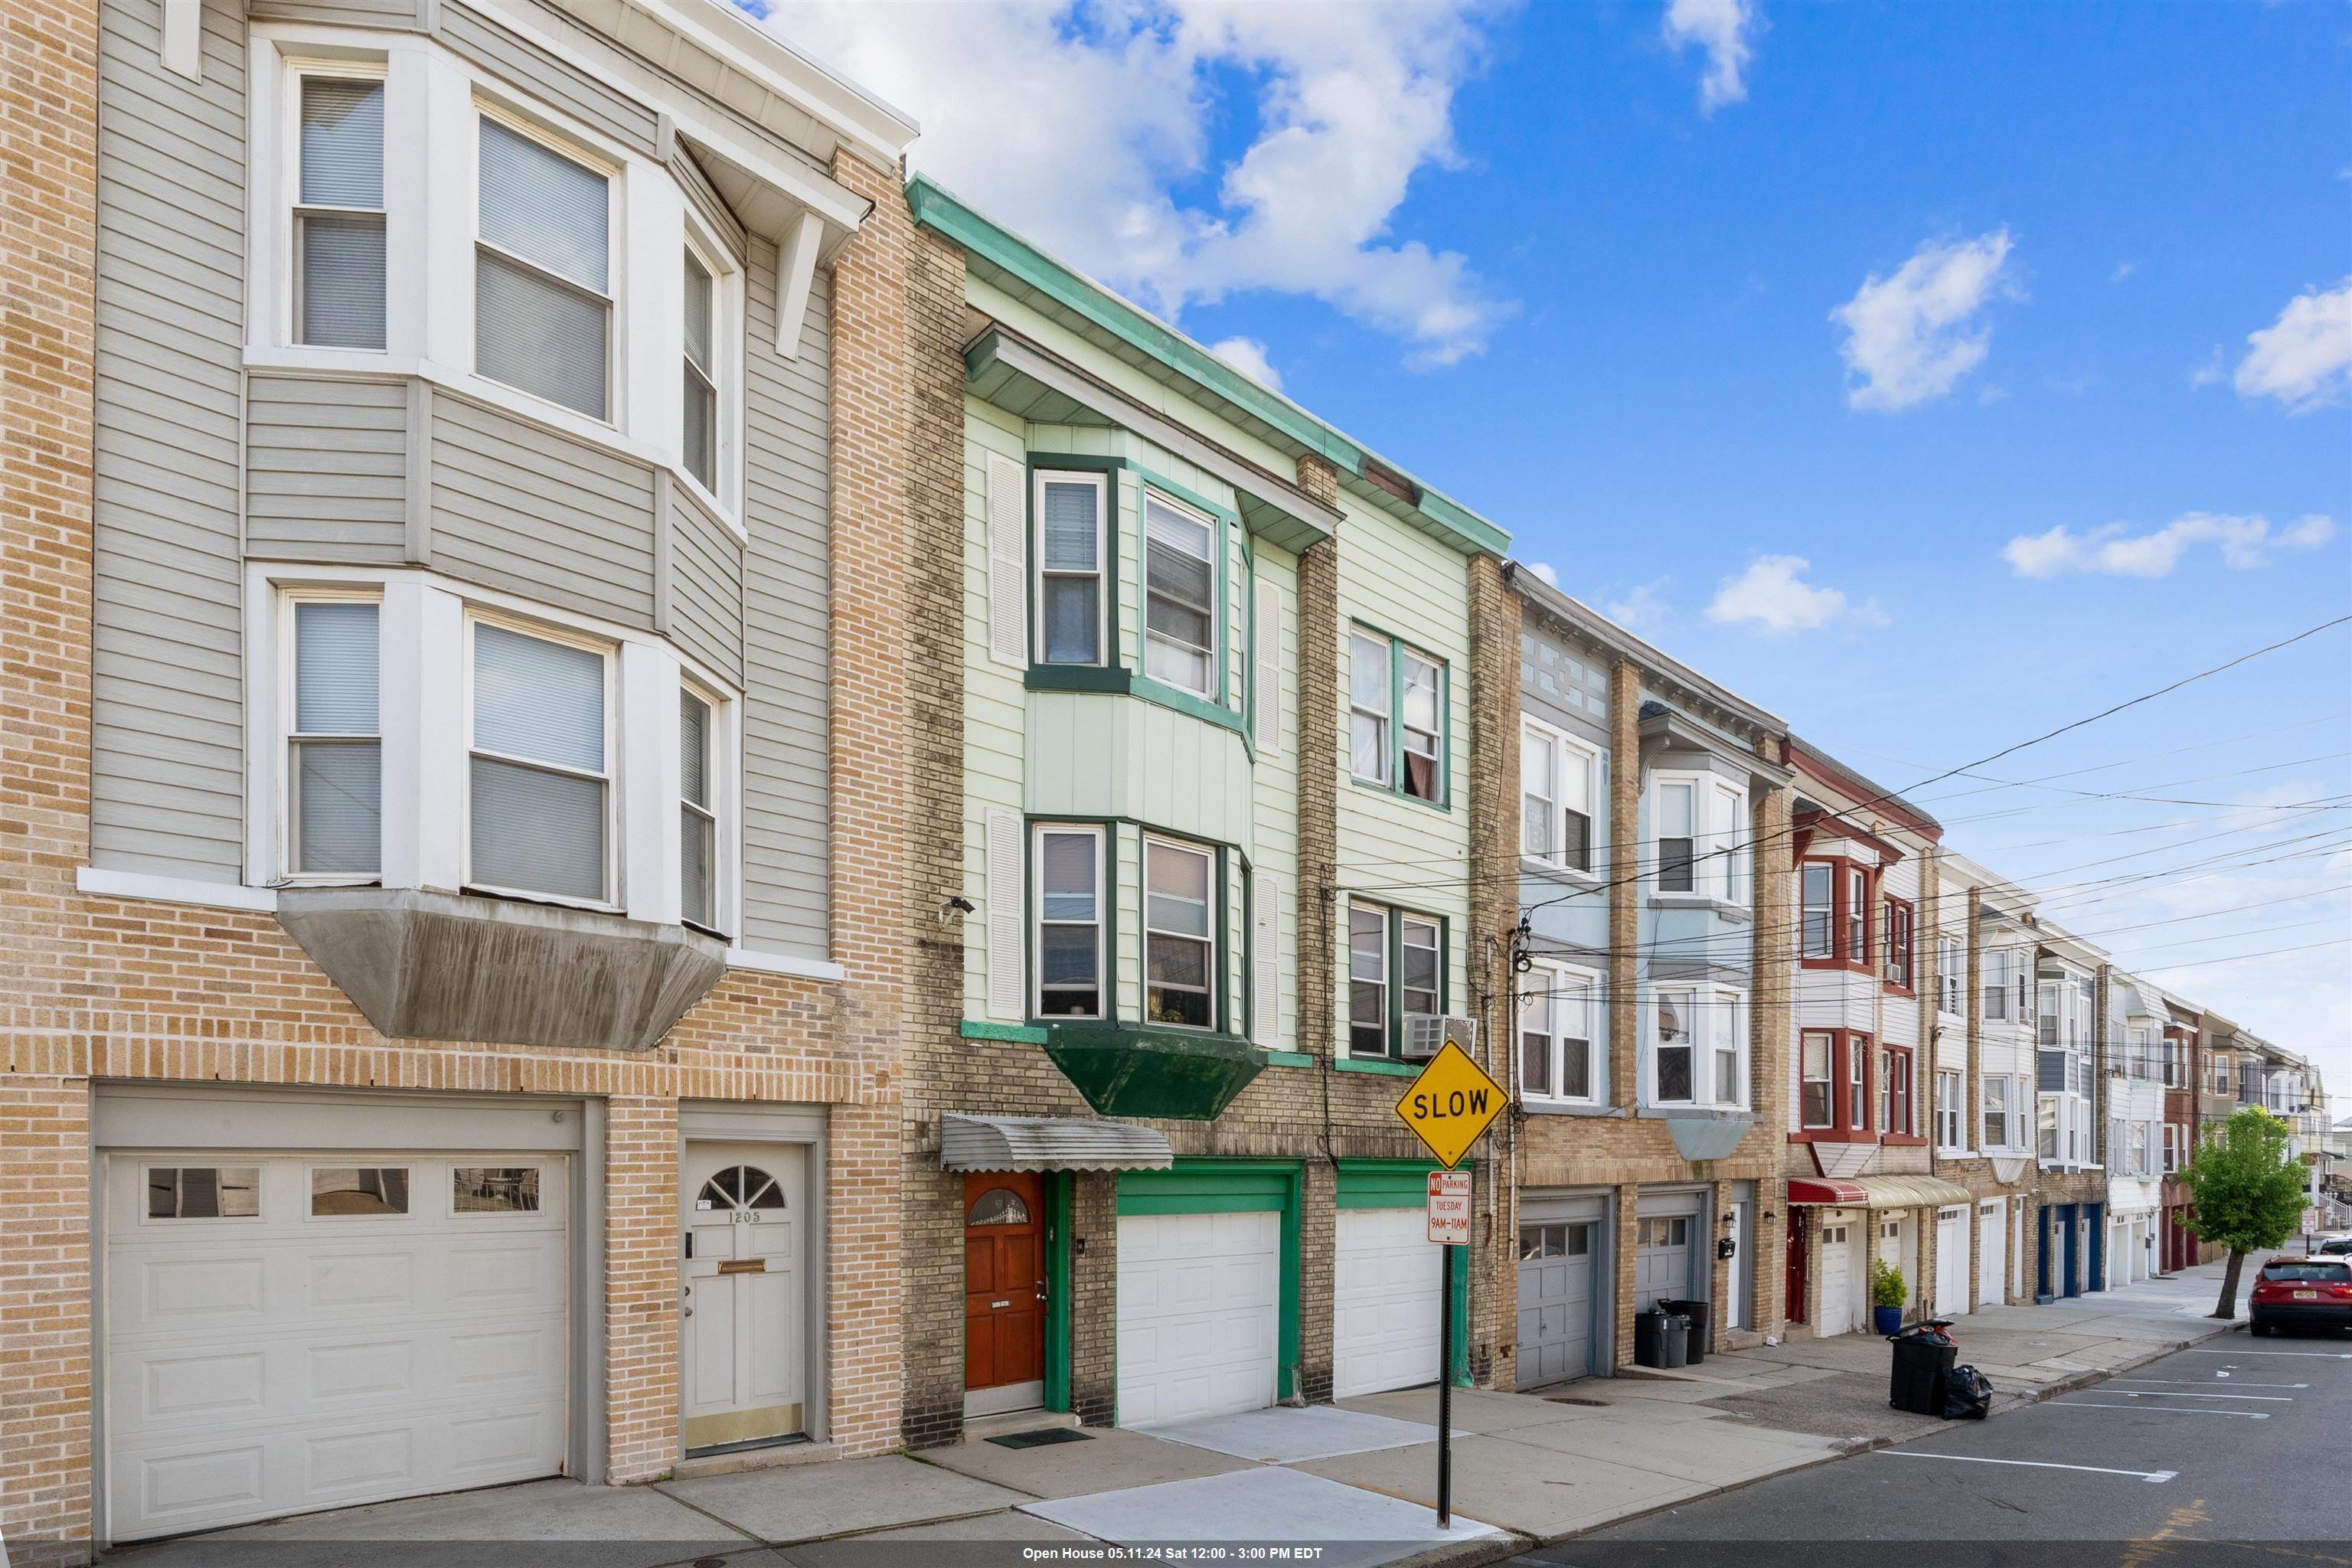 1207 8TH ST Multi-Family New Jersey